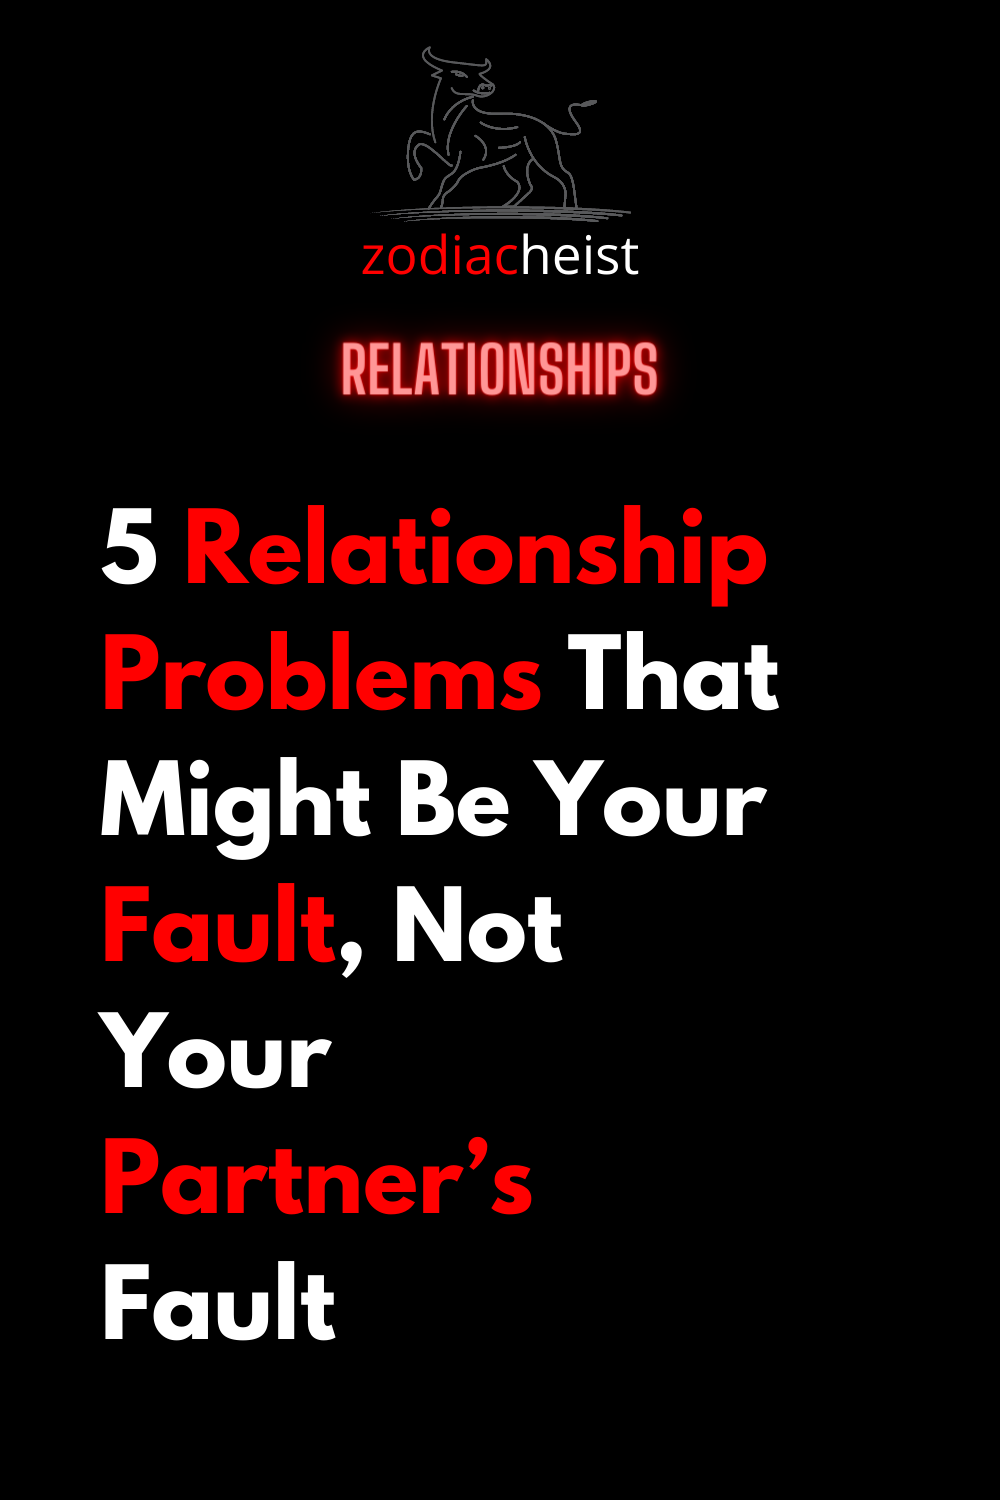 5 Relationship Problems That Might Be Your Fault, Not Your Partner’s Fault